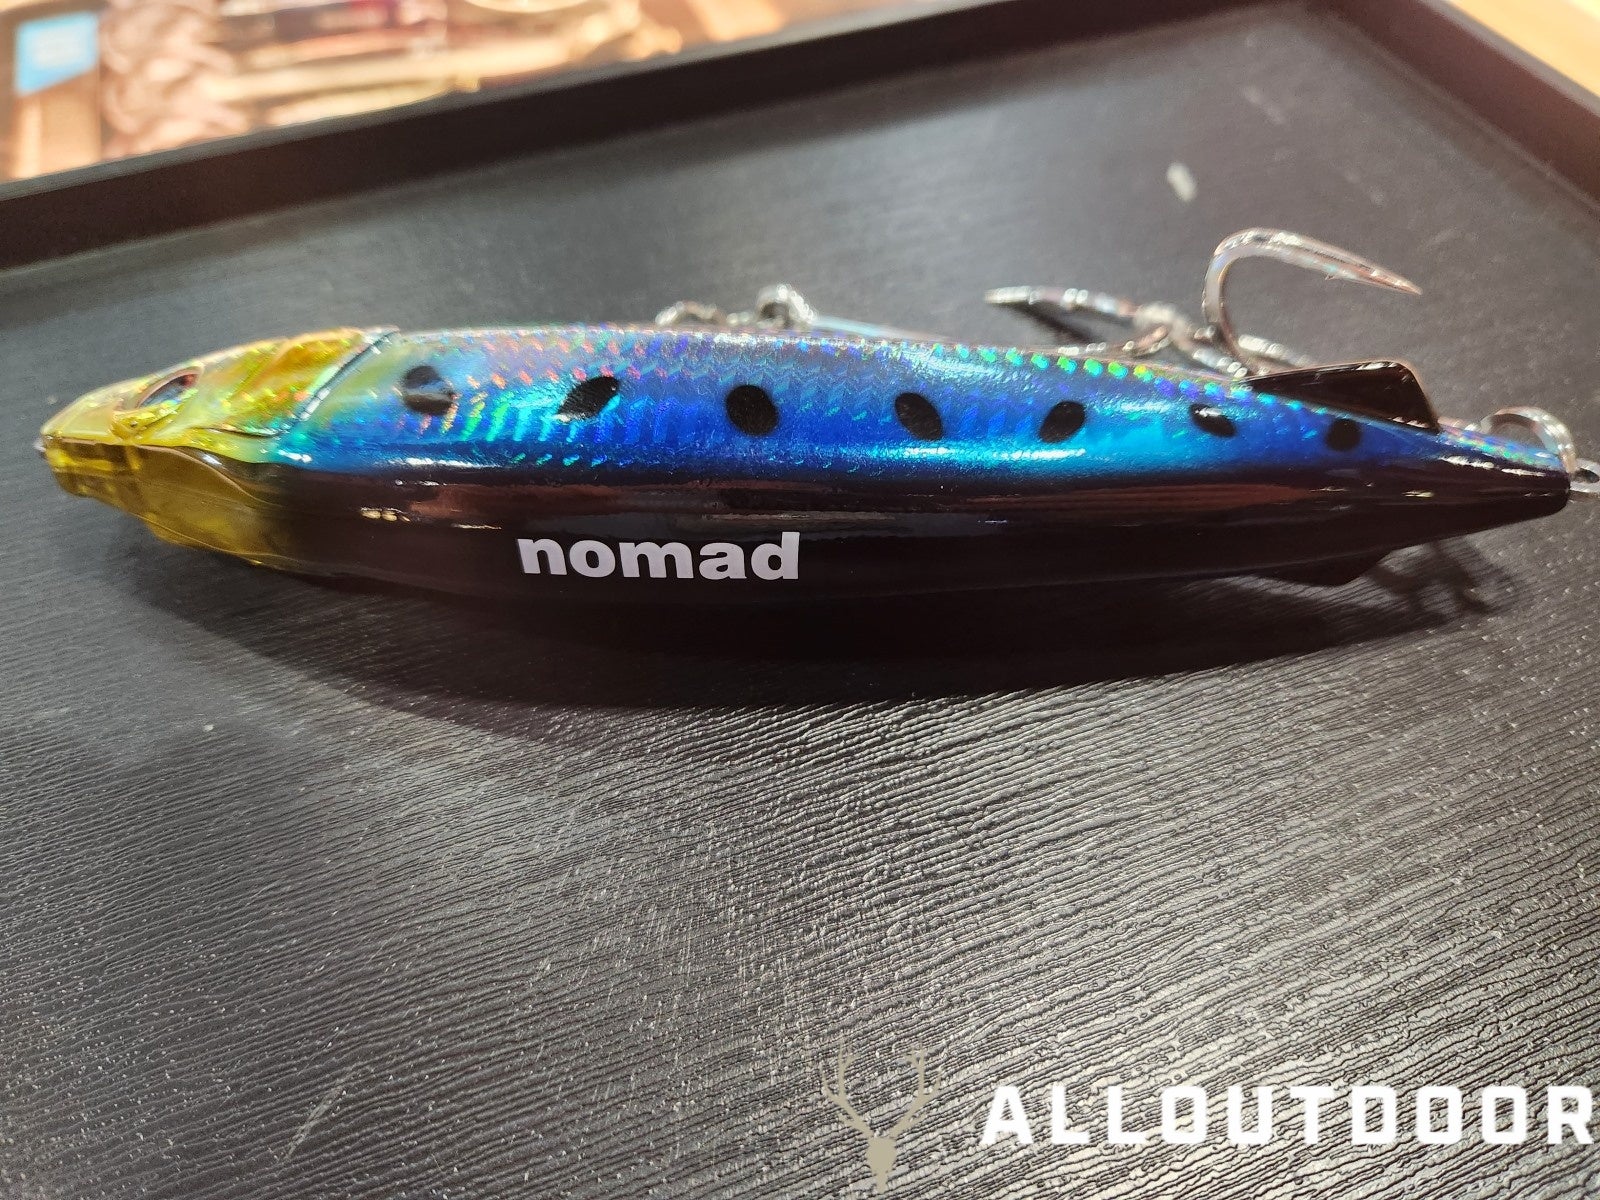 [ICAST 2023] Nomad Design's Fastest Trolling Plug Yet - The Madscad AT